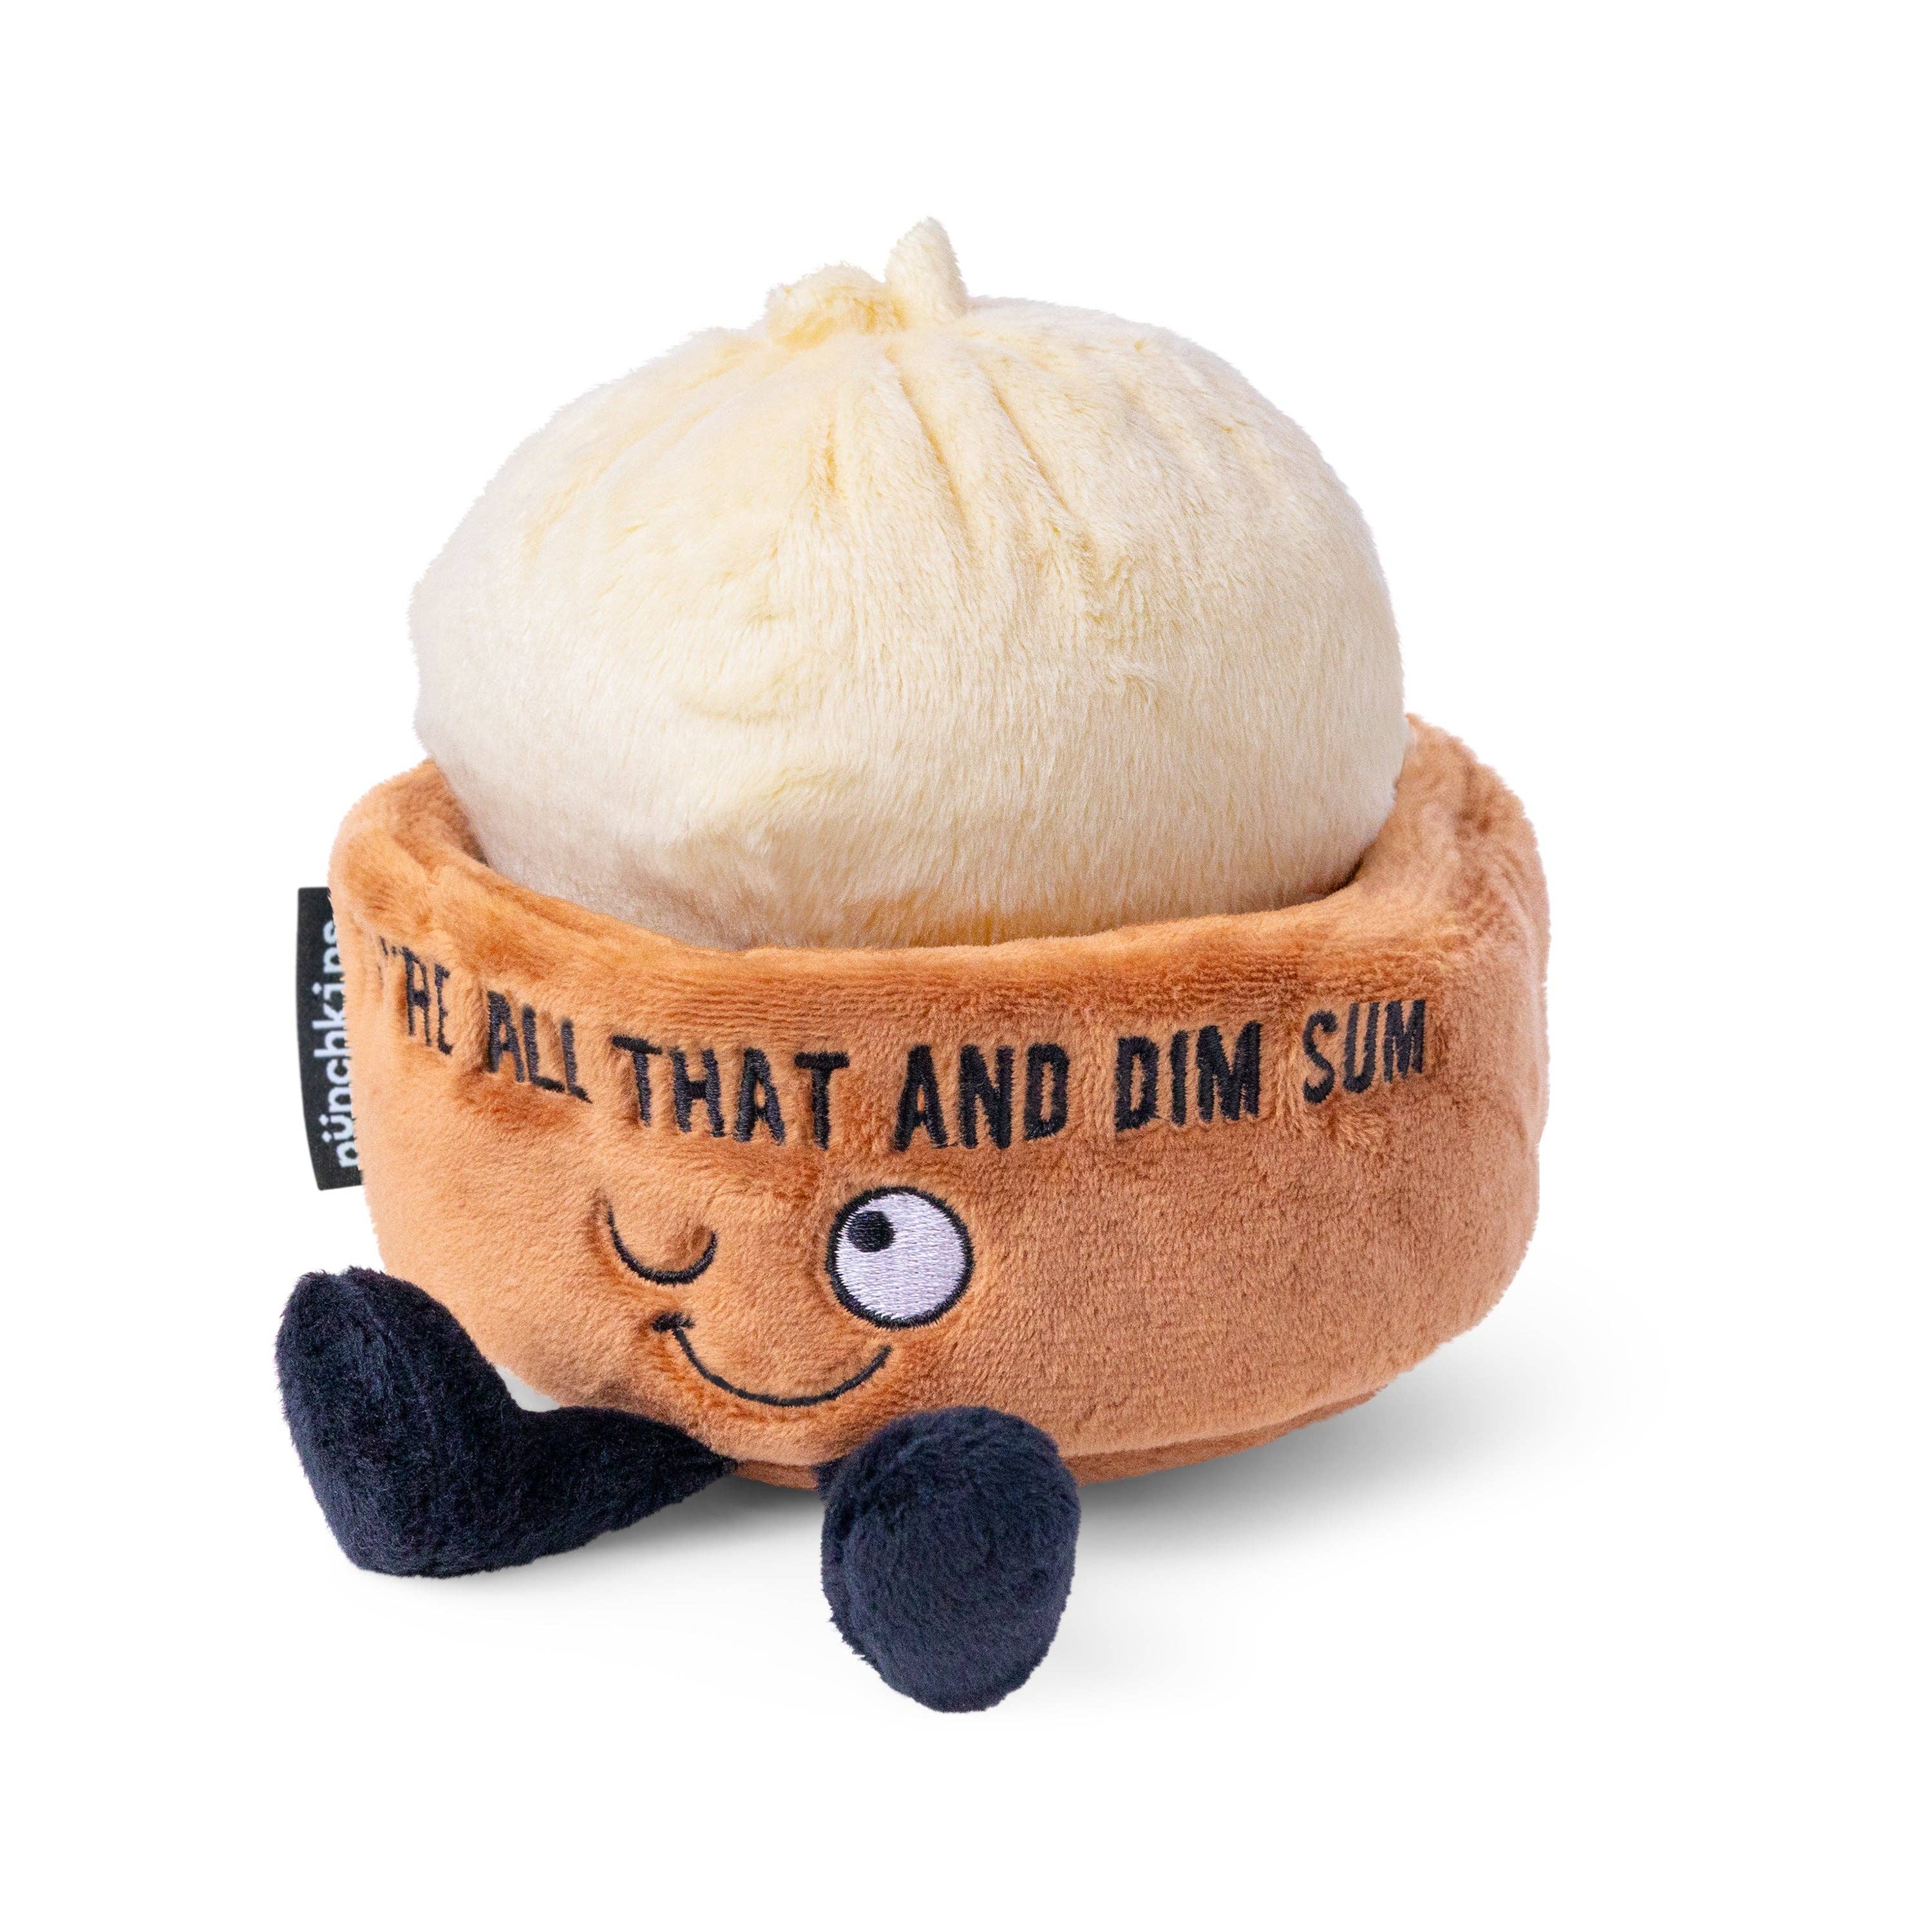 Punchkins "You're All That & Dim Sum" Novelty Plush Dim Sum Gift Kawaii Gifts 850042202241